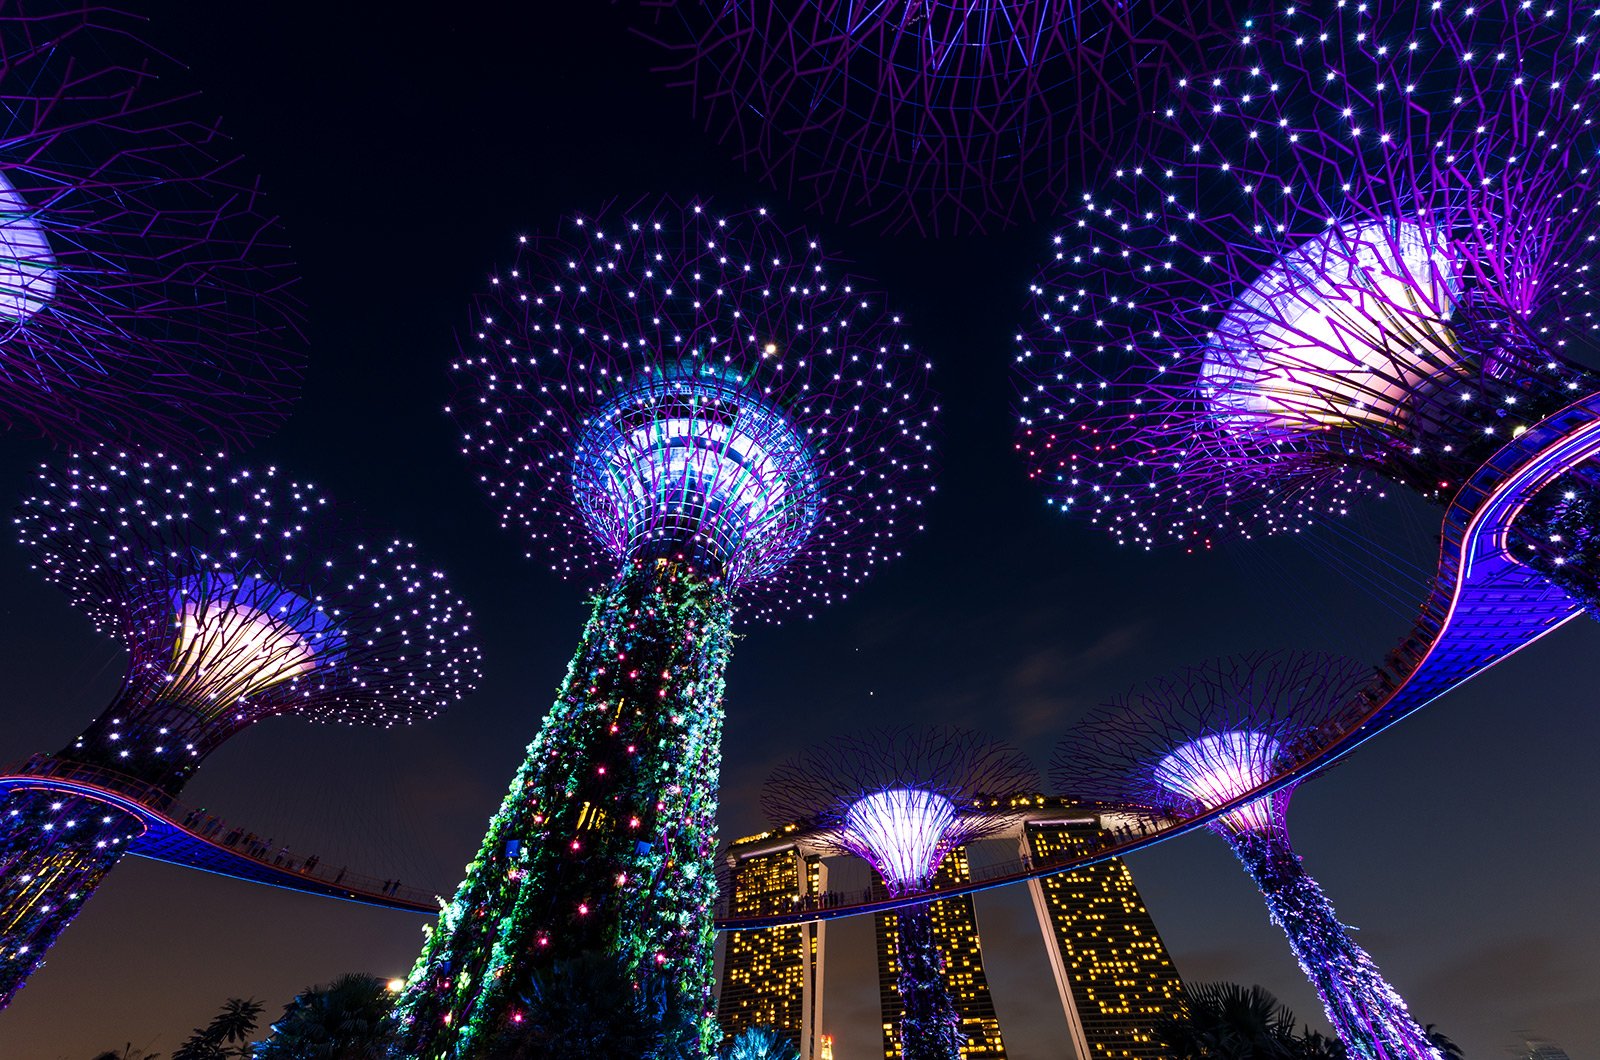 How to catch the light and music show in Gardens by the Bay in Singapore